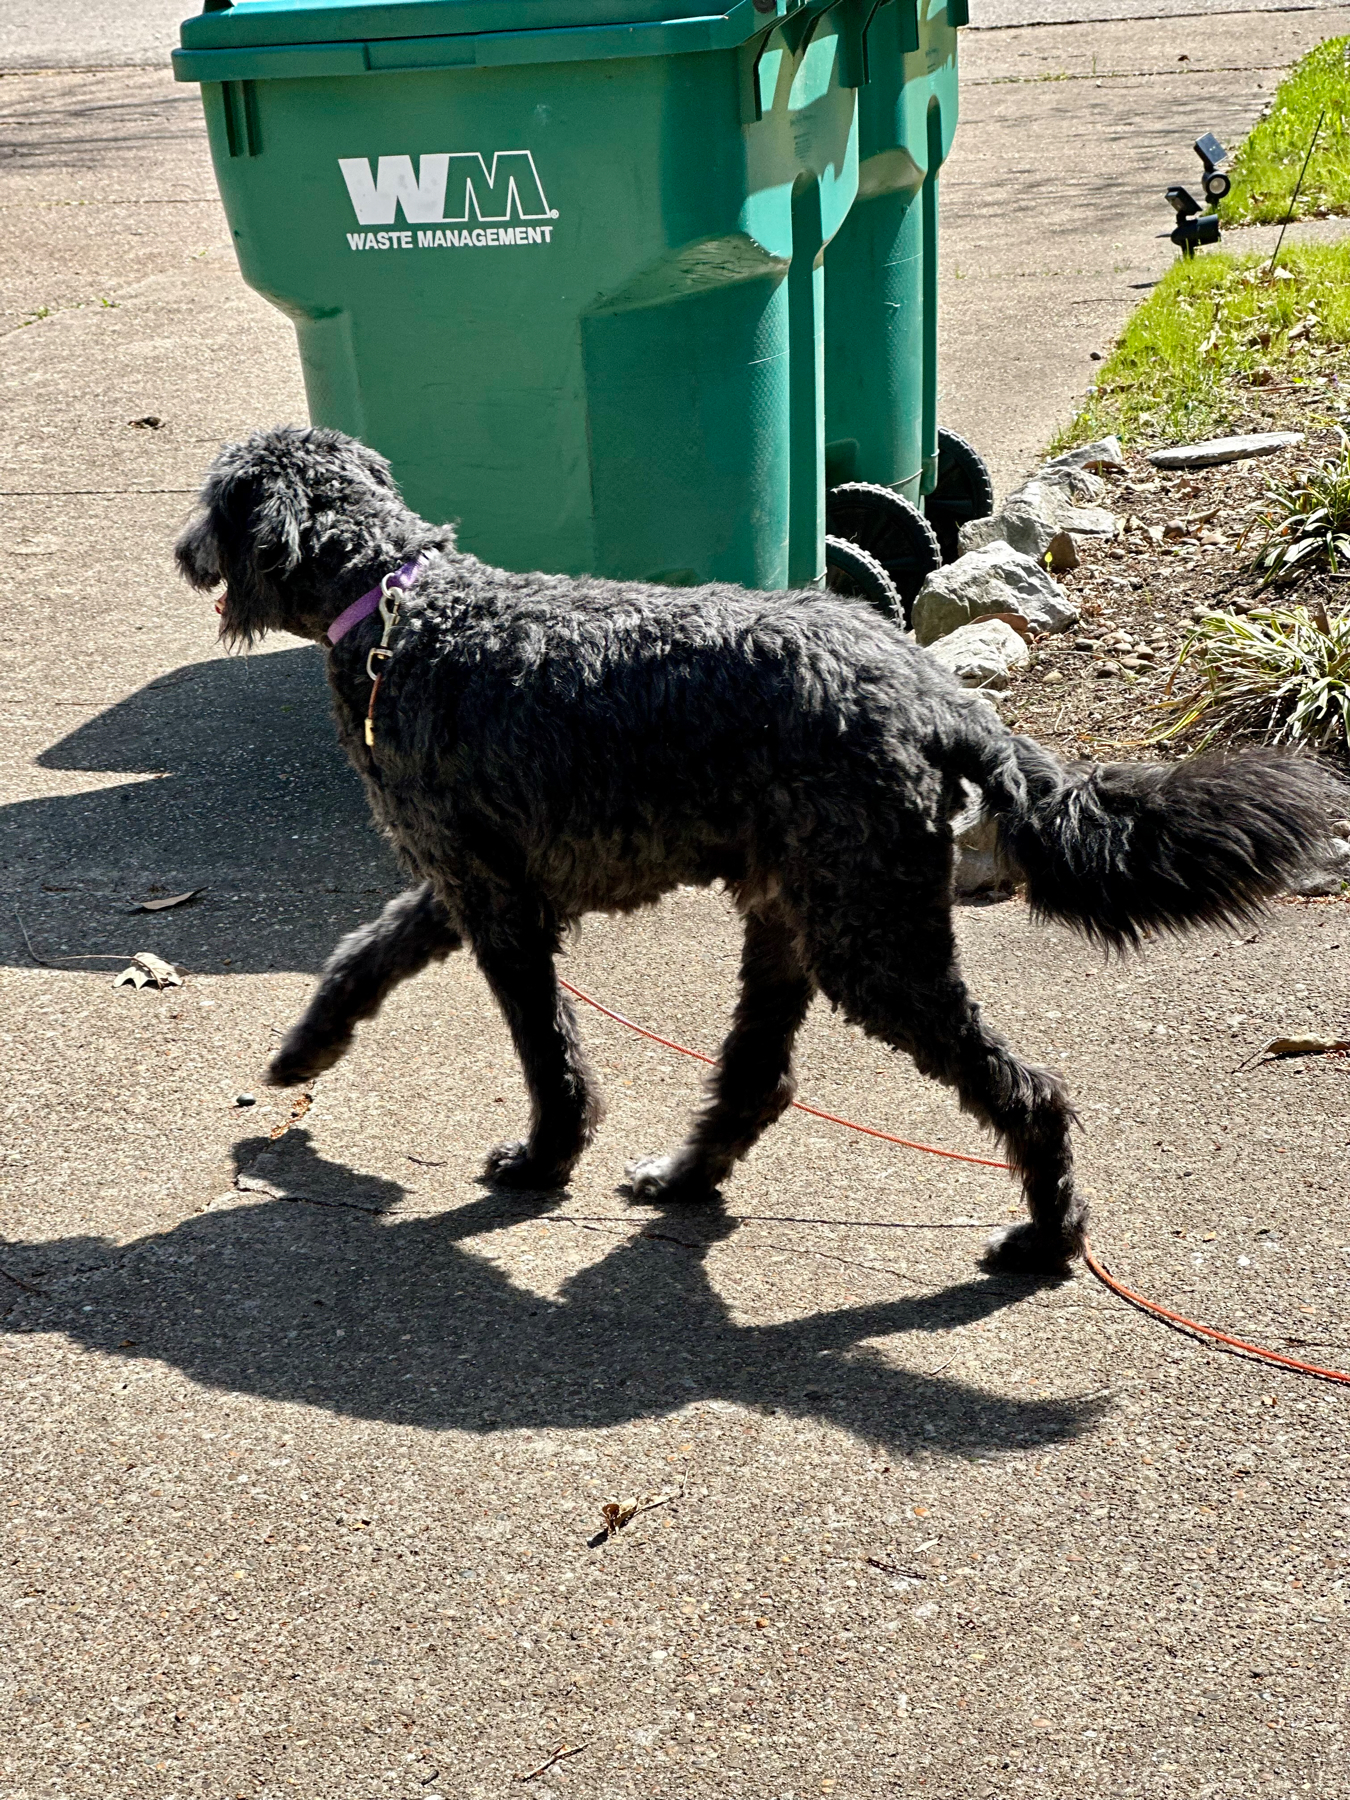 A black dog walking on a leash beside a green Waste Management trash bin on a sunny day with its shadow cast on the pavement.